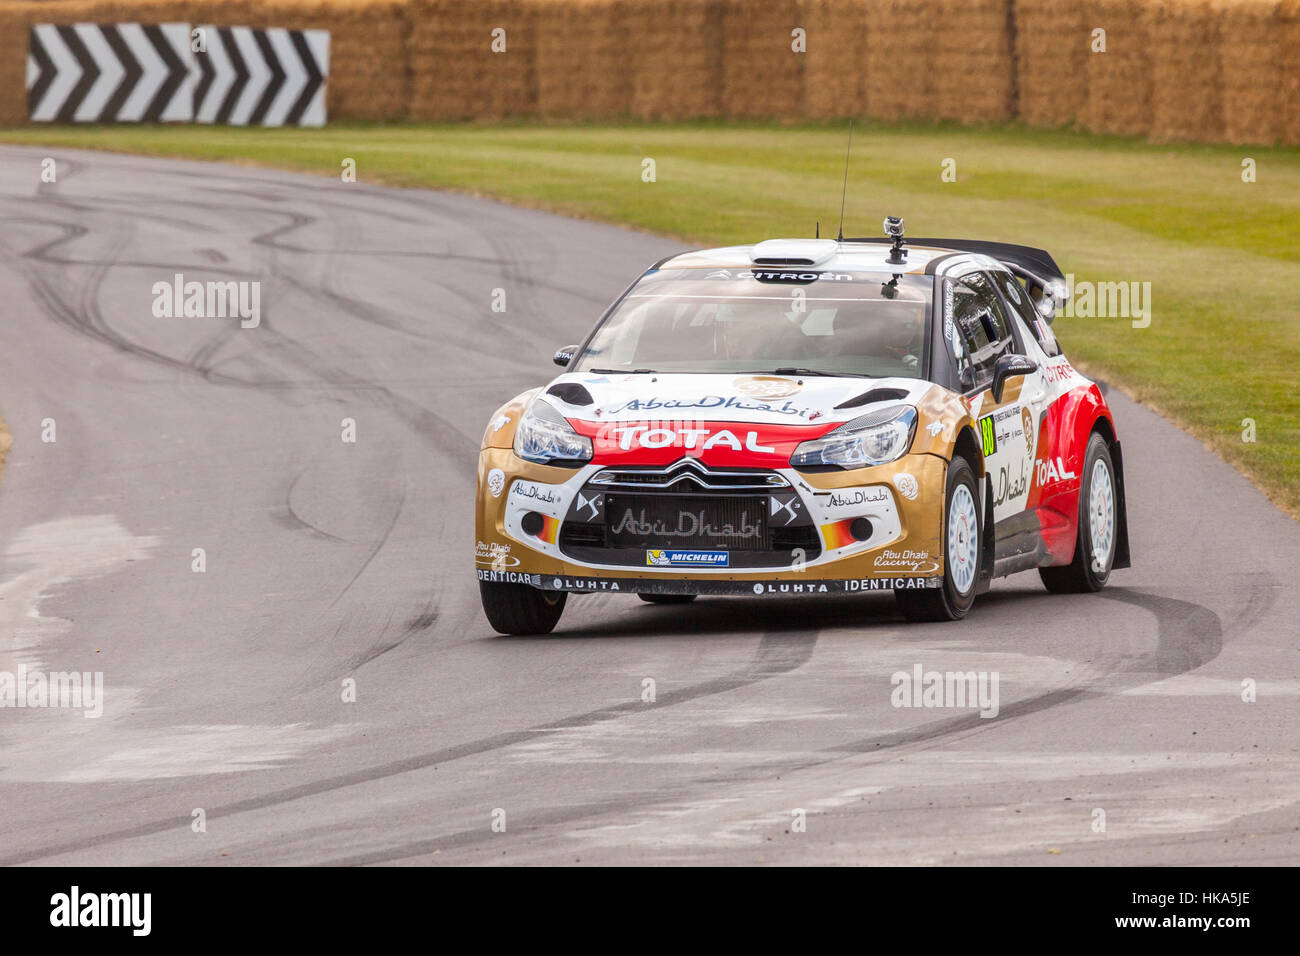 Citroen rally car at Goodwood Festival of Speed 2014 Stock Photo